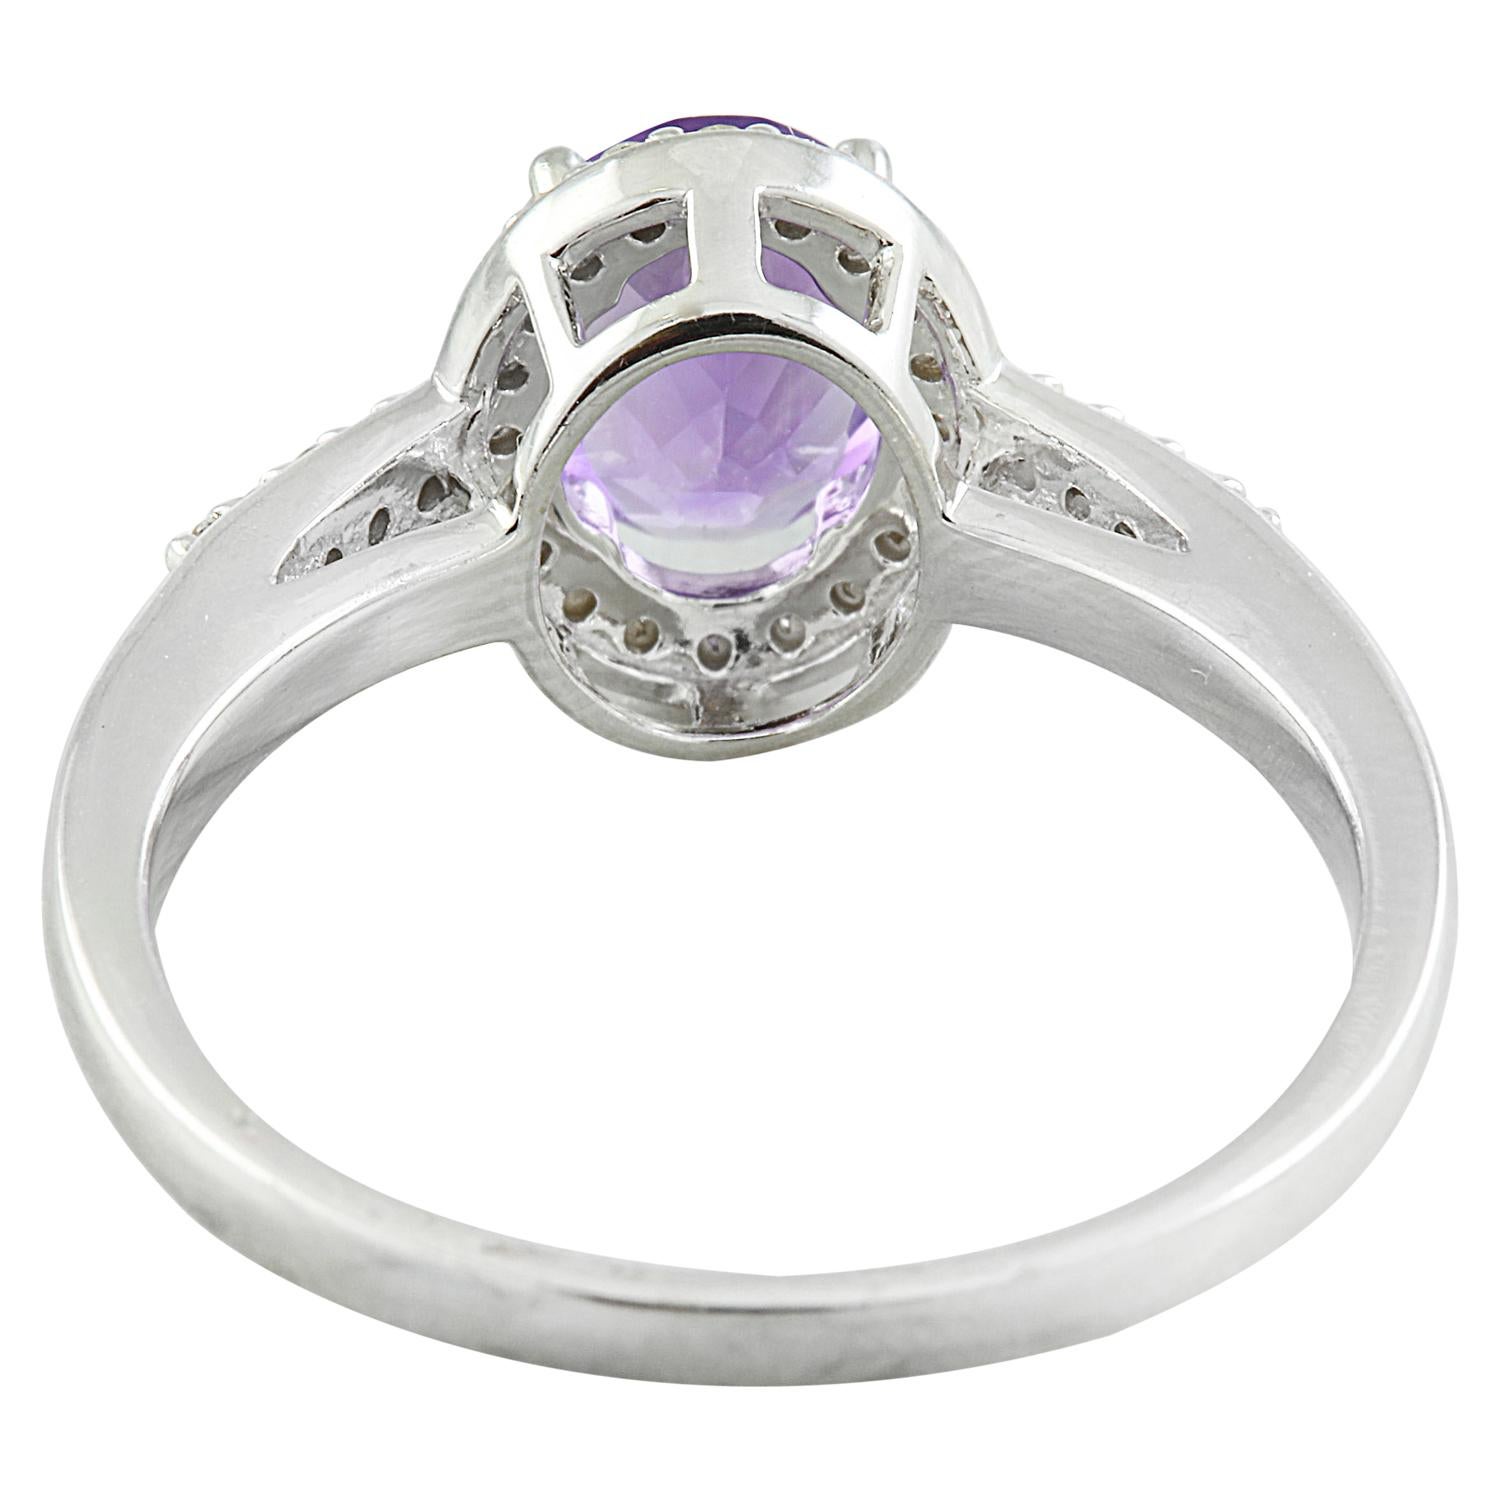 Oval Cut Exquisite Natural Amethyst Diamond Ring in 14K Solid White Gold For Sale